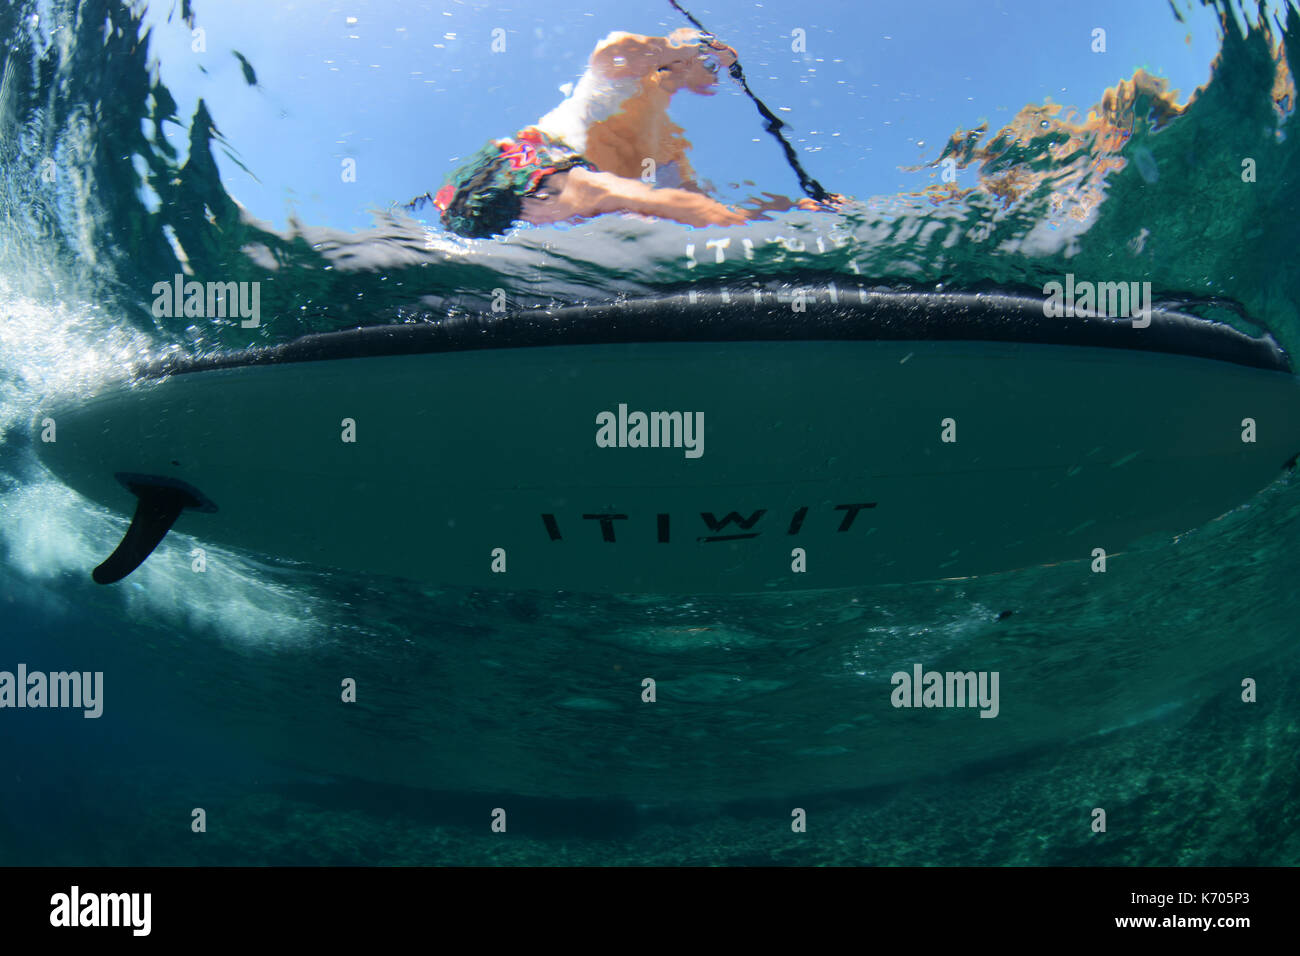 Women Paddleboarder underwater on a wave in the Mediterranean Sea Stock Photo